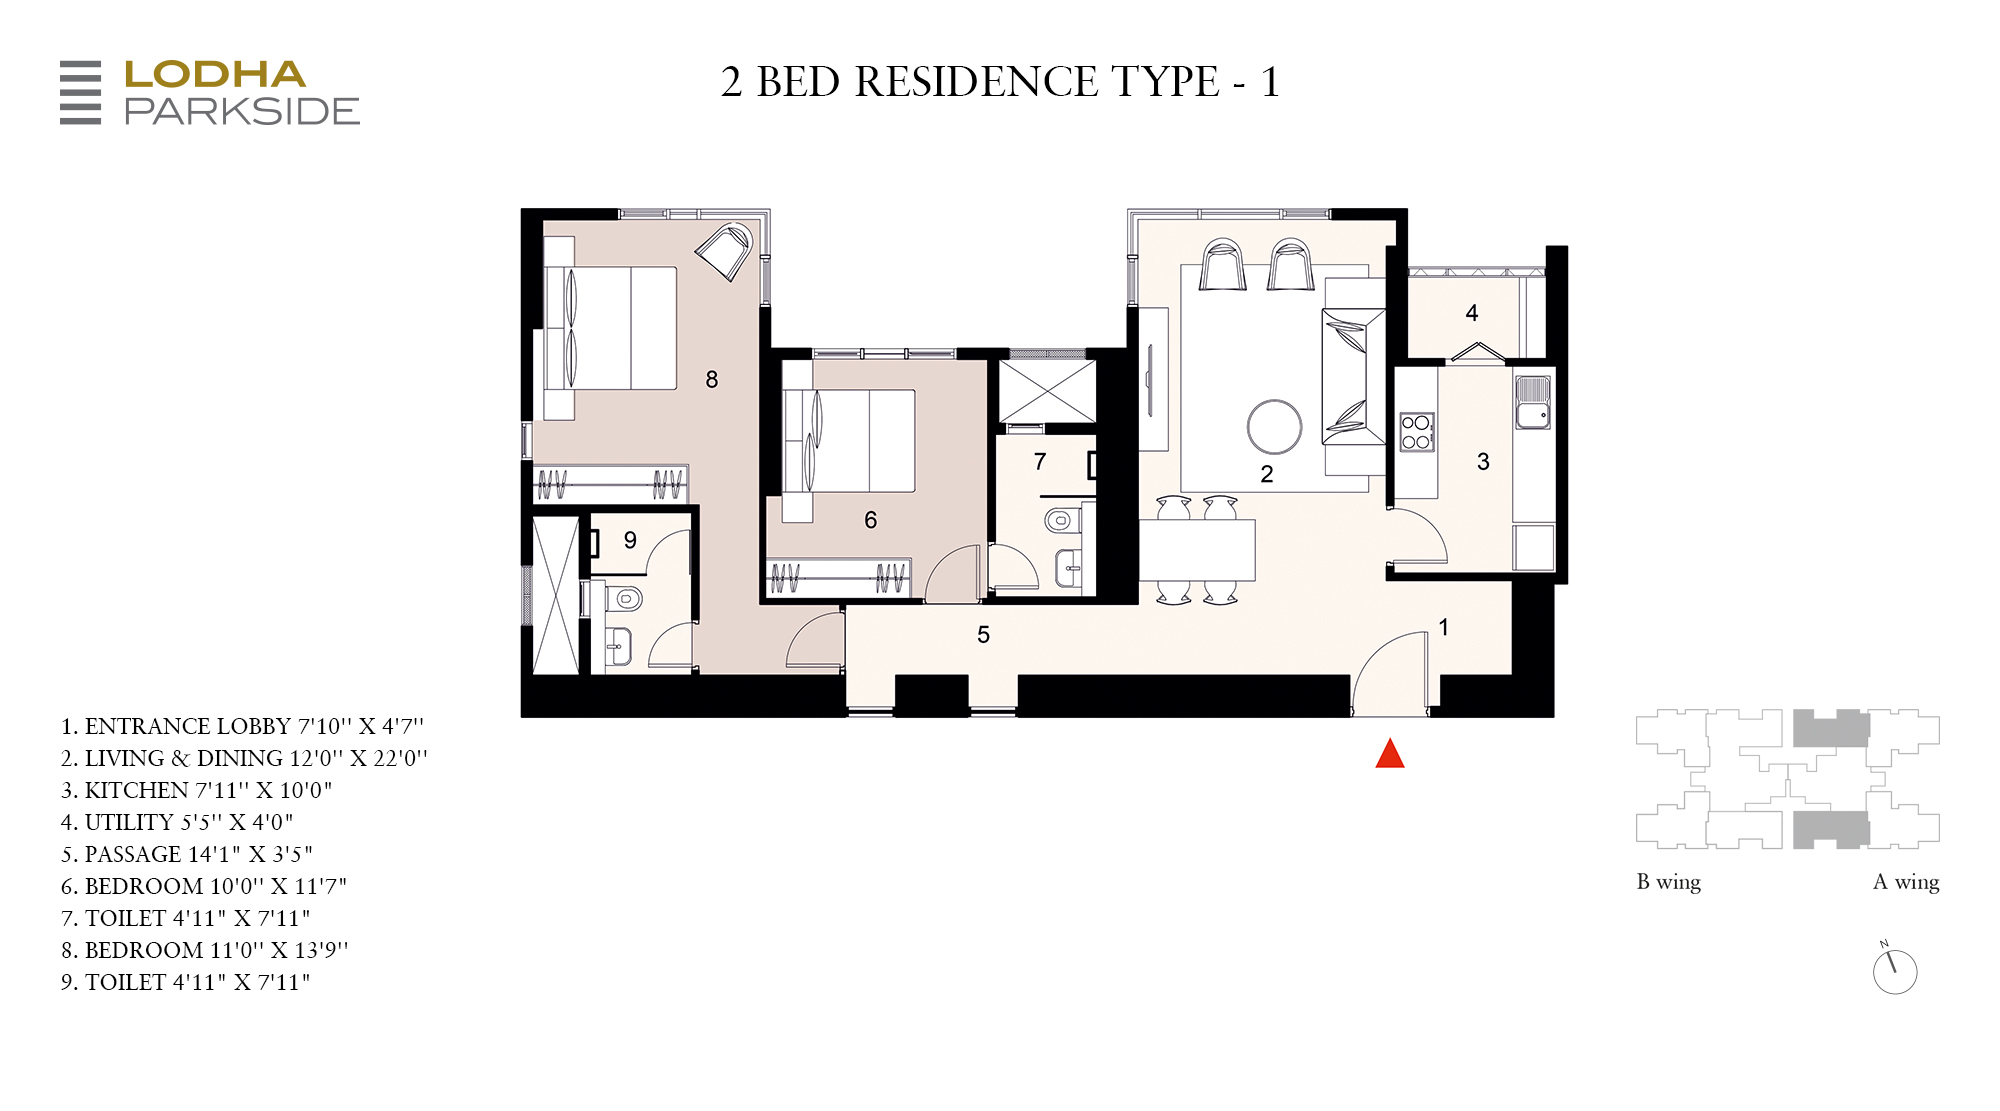 2 Bed Residence Type 1